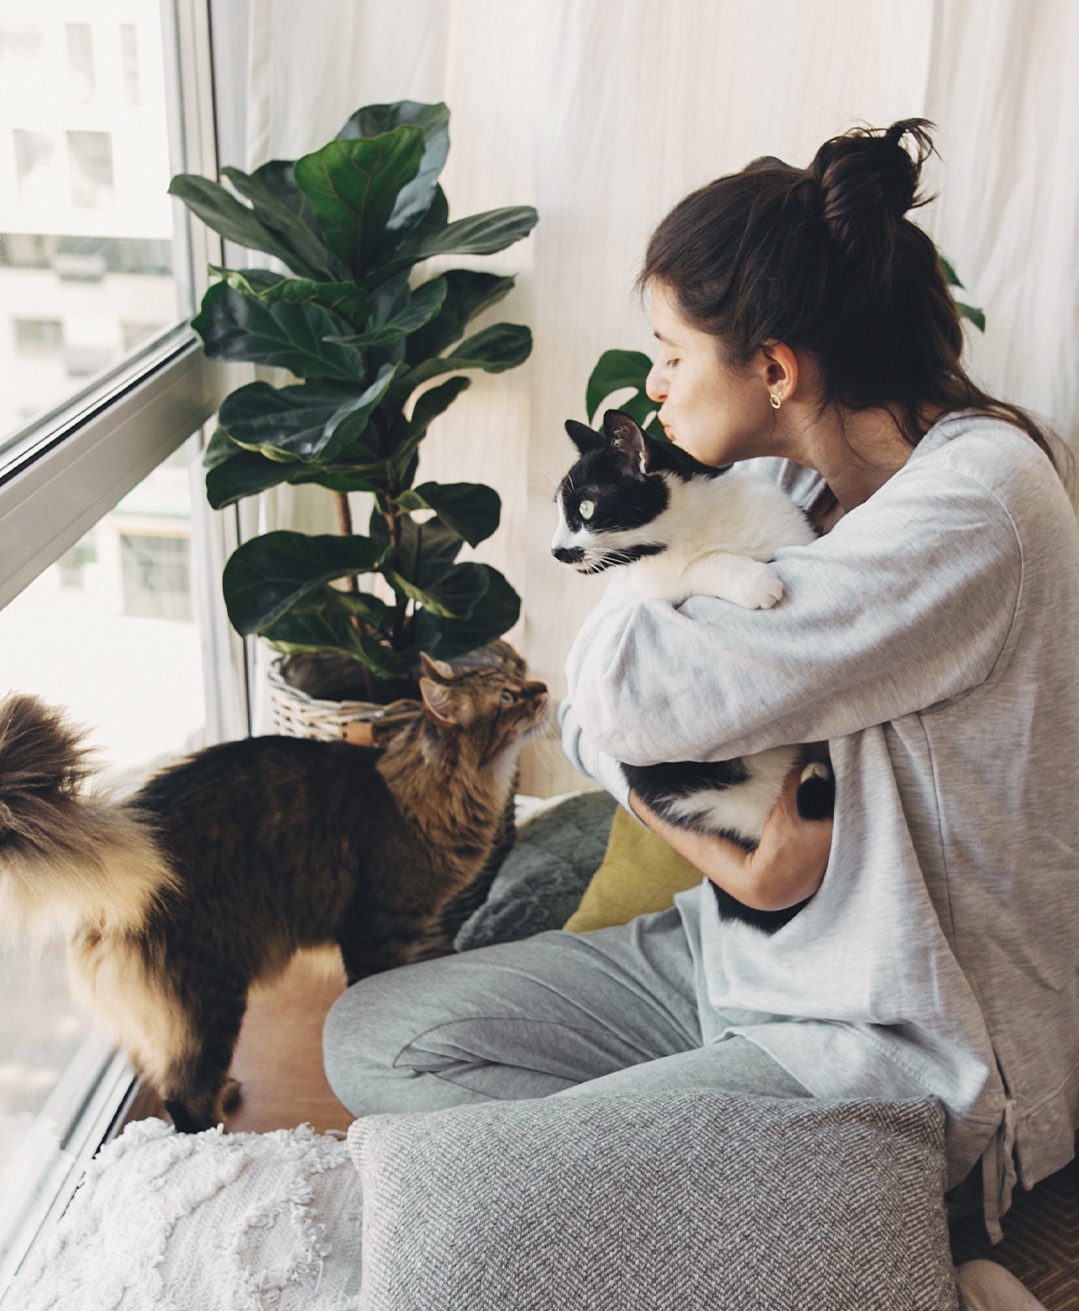 A young woman holding and kissing one of her cats while another cat looks up lovingly at her